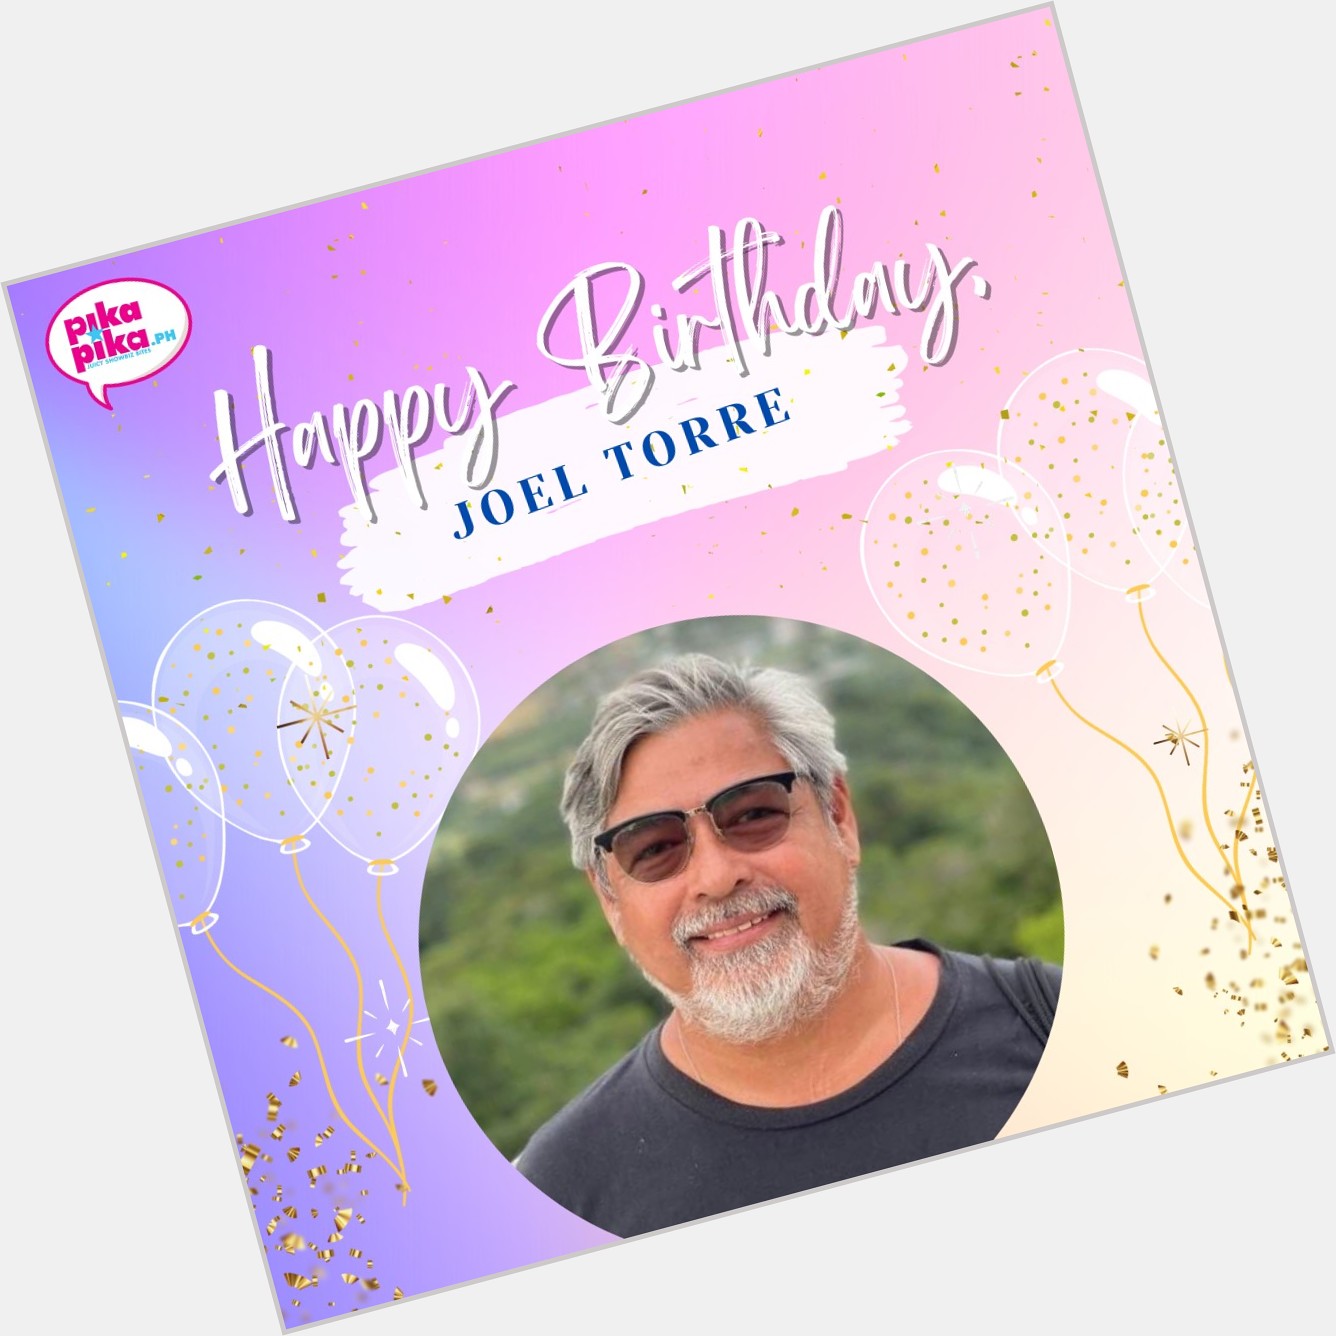 Happy birthday, Sir Joel Torre! May your special day be filled with love and cheers.    